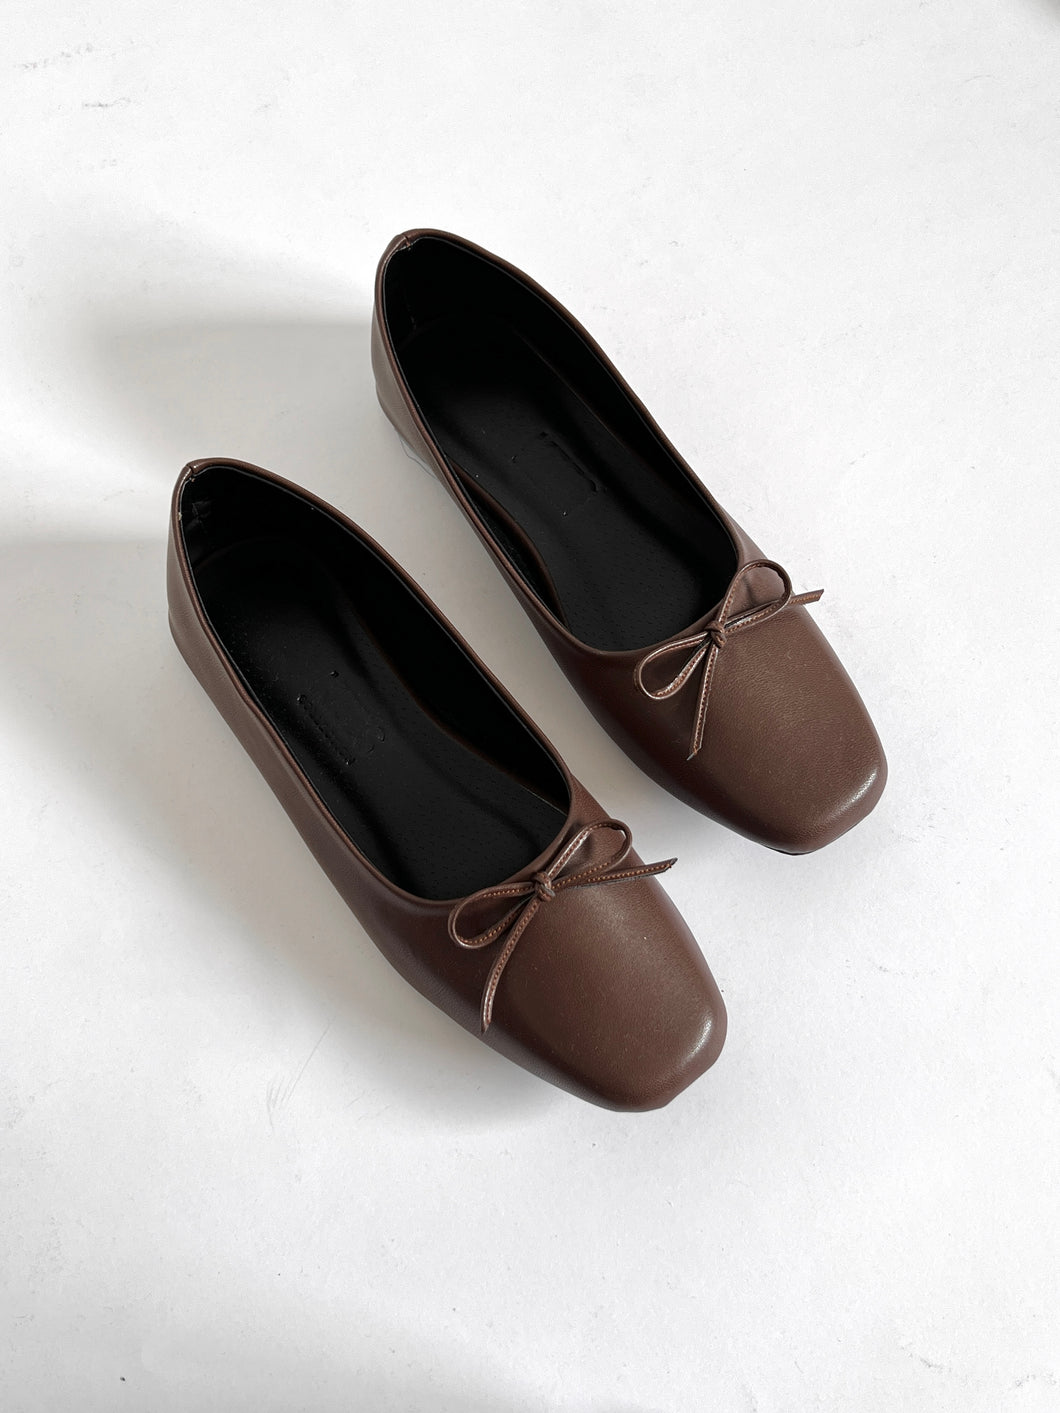 The Tali Shoes Choco